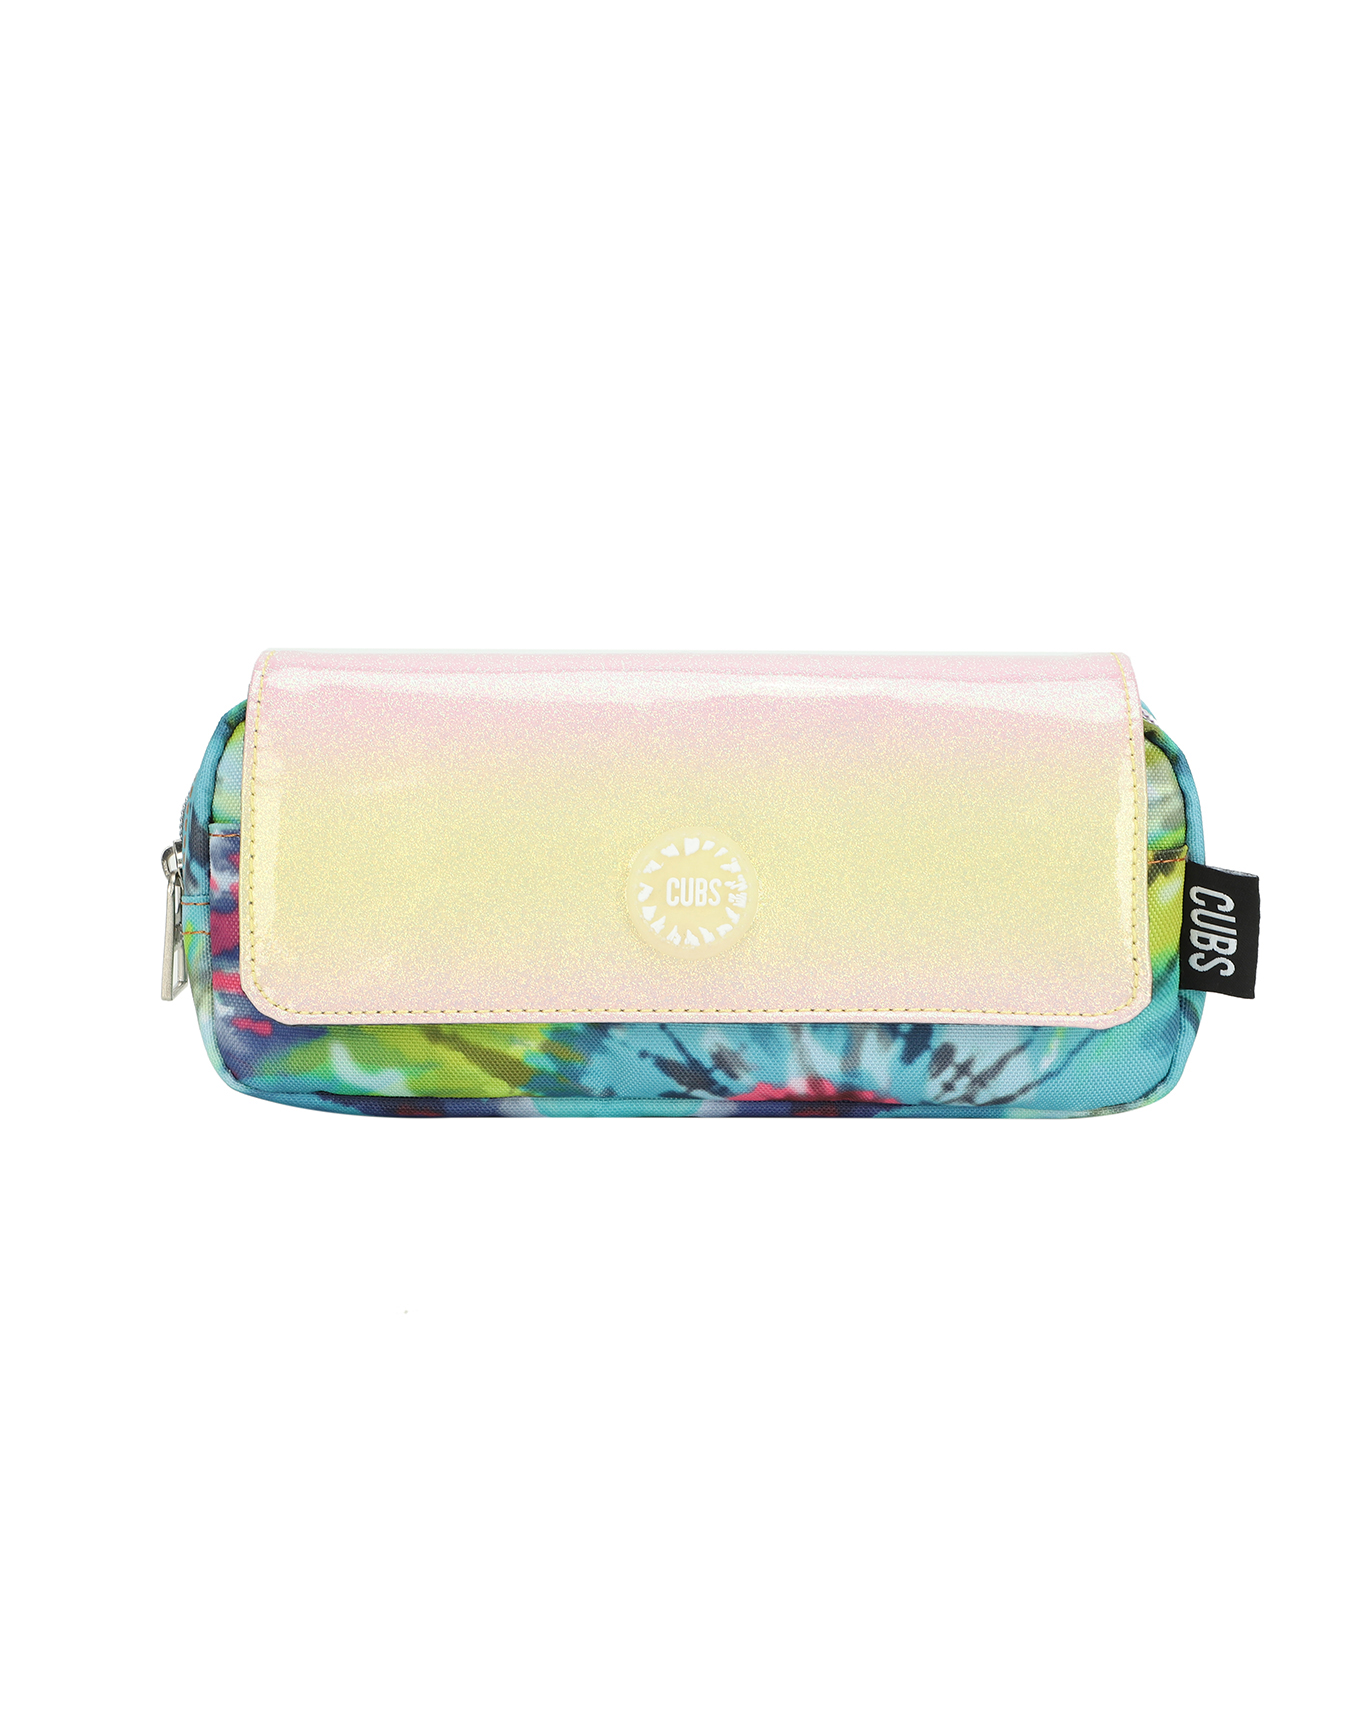 High School Pencil Case - Green And Yellow Tie Dye